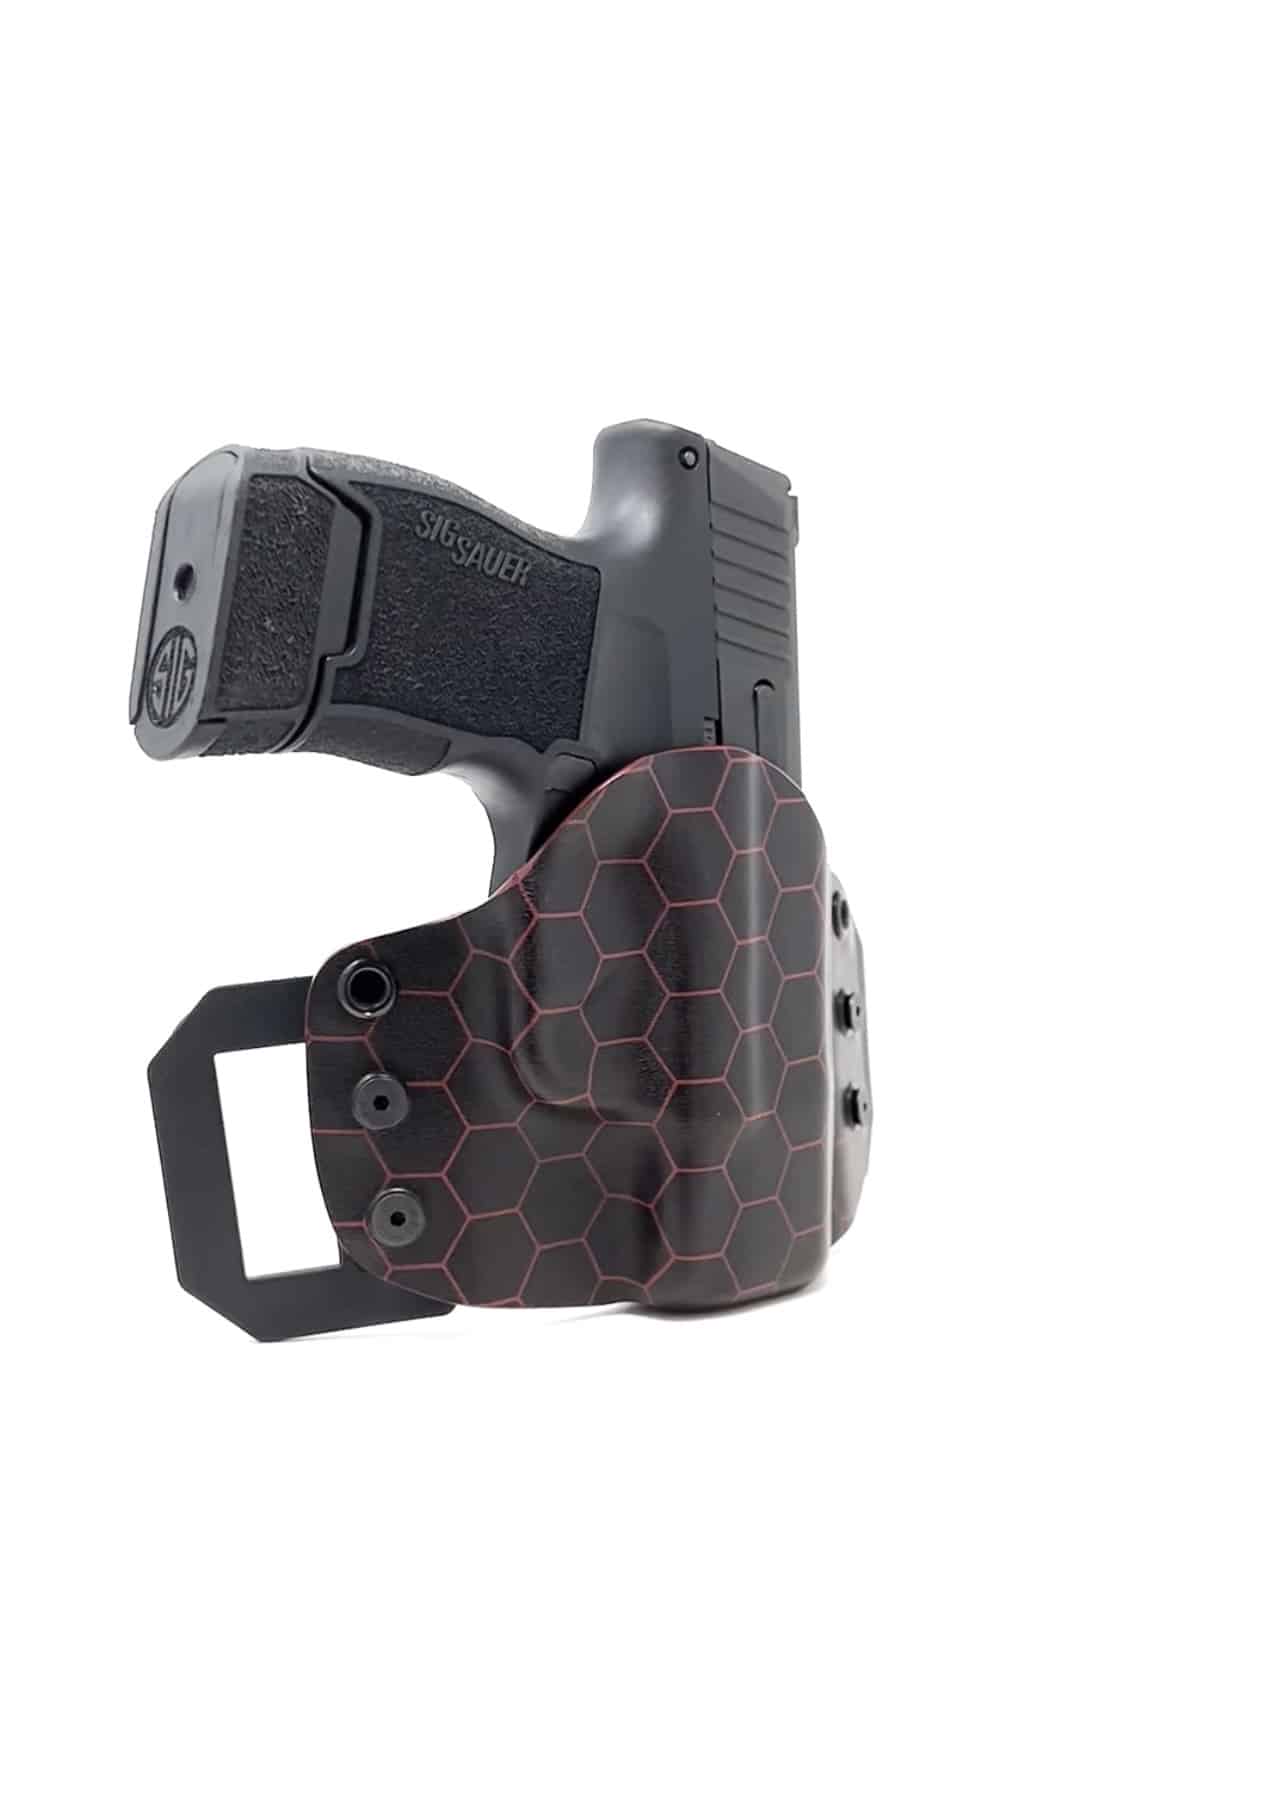 Don't Tread On Me Black OWB Kydex Holster For Walther 